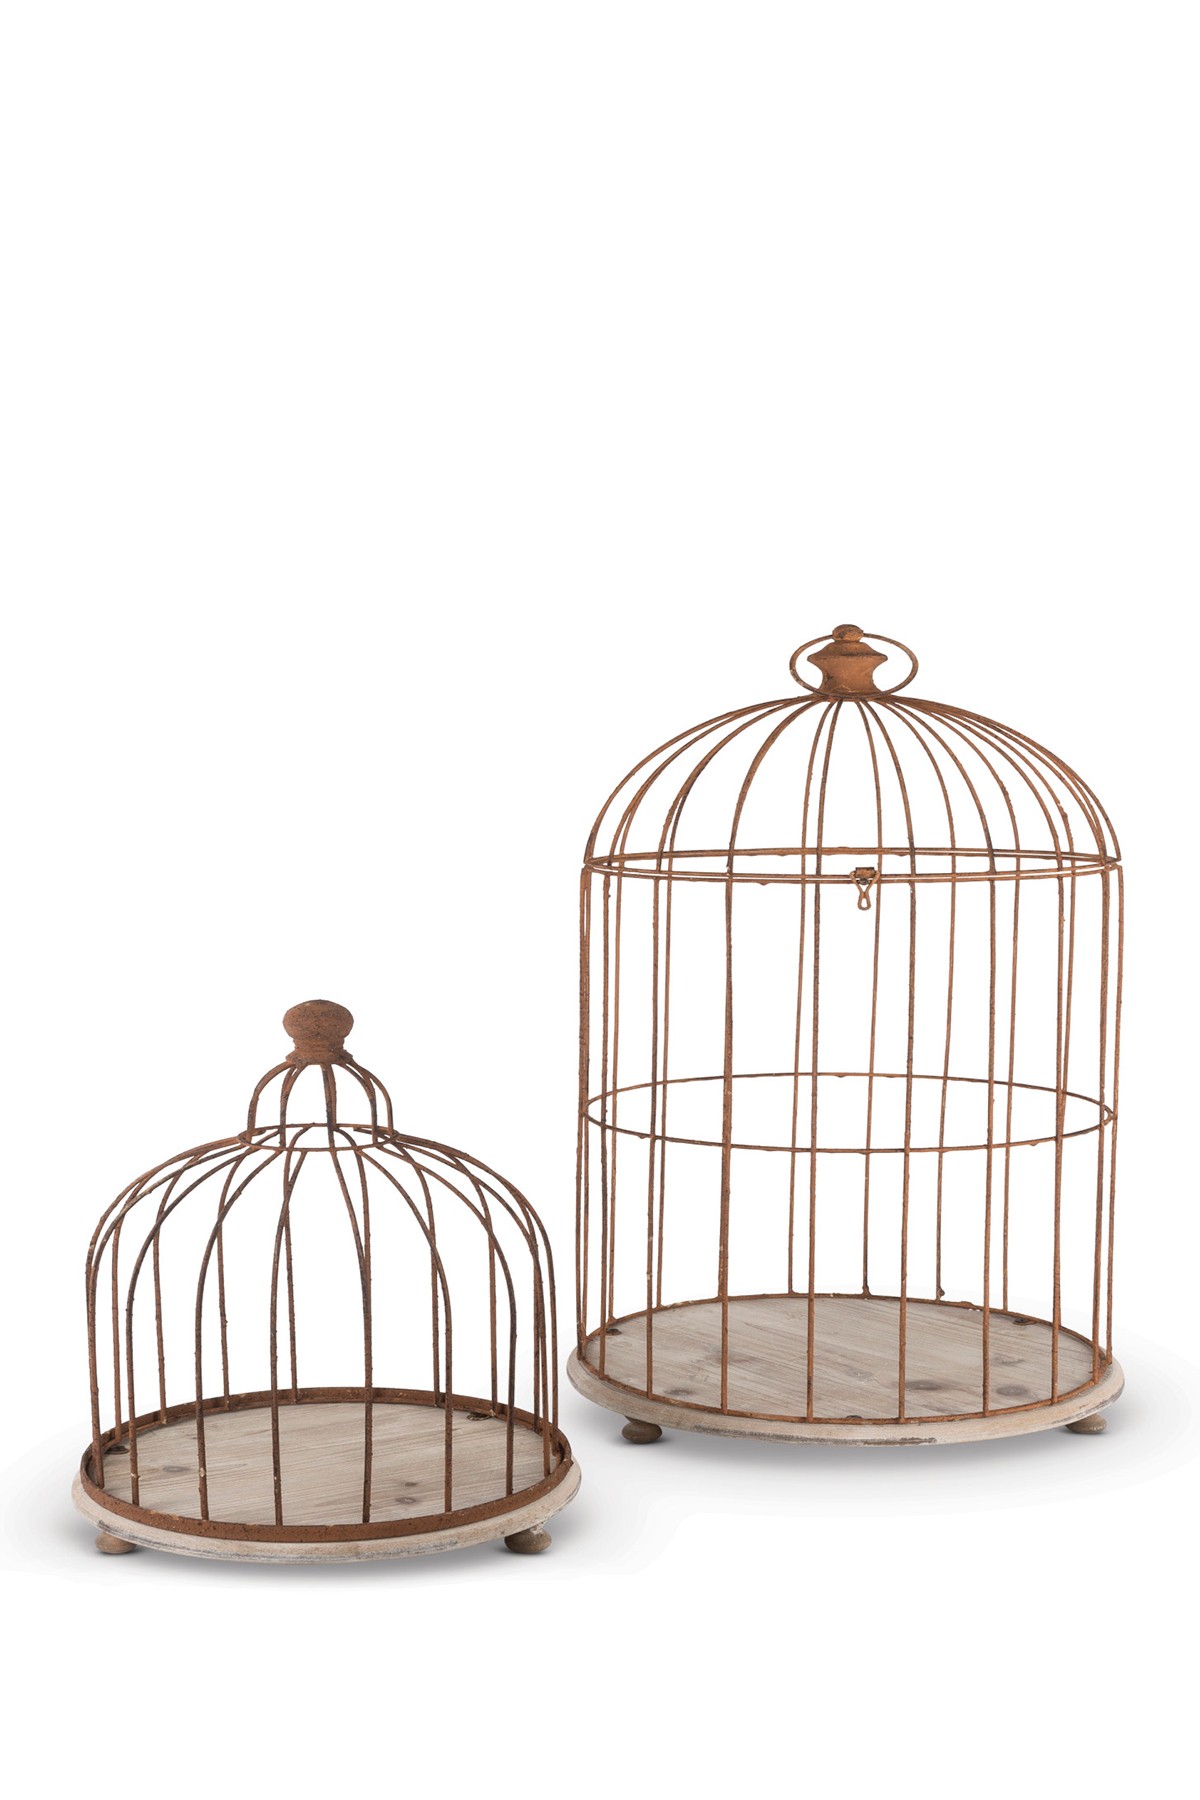 Gerson Company Rusted Wire Metallic Bird Cages - Set of 2 | Bed Bath ...